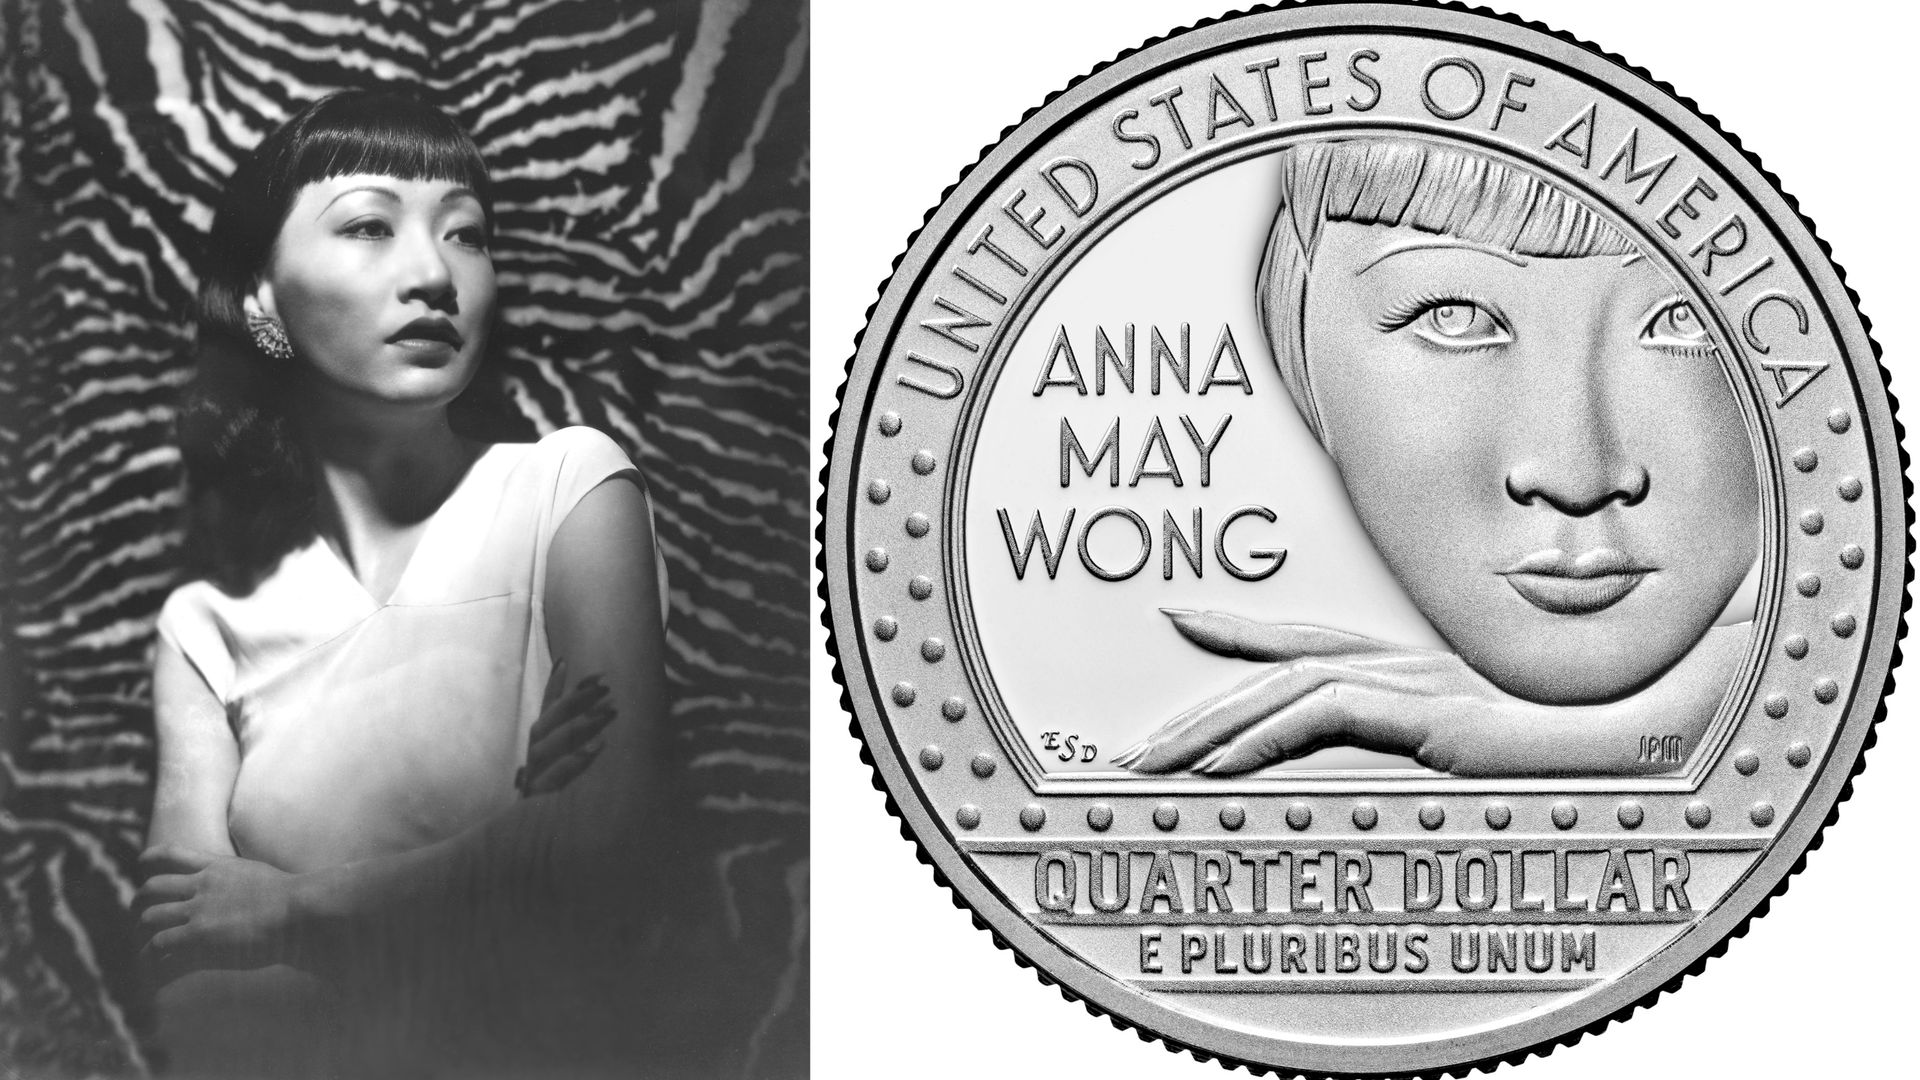 Portrait of Anna May Wong in a dress with her arms crossed next to a design of the Anna May Wong quarter